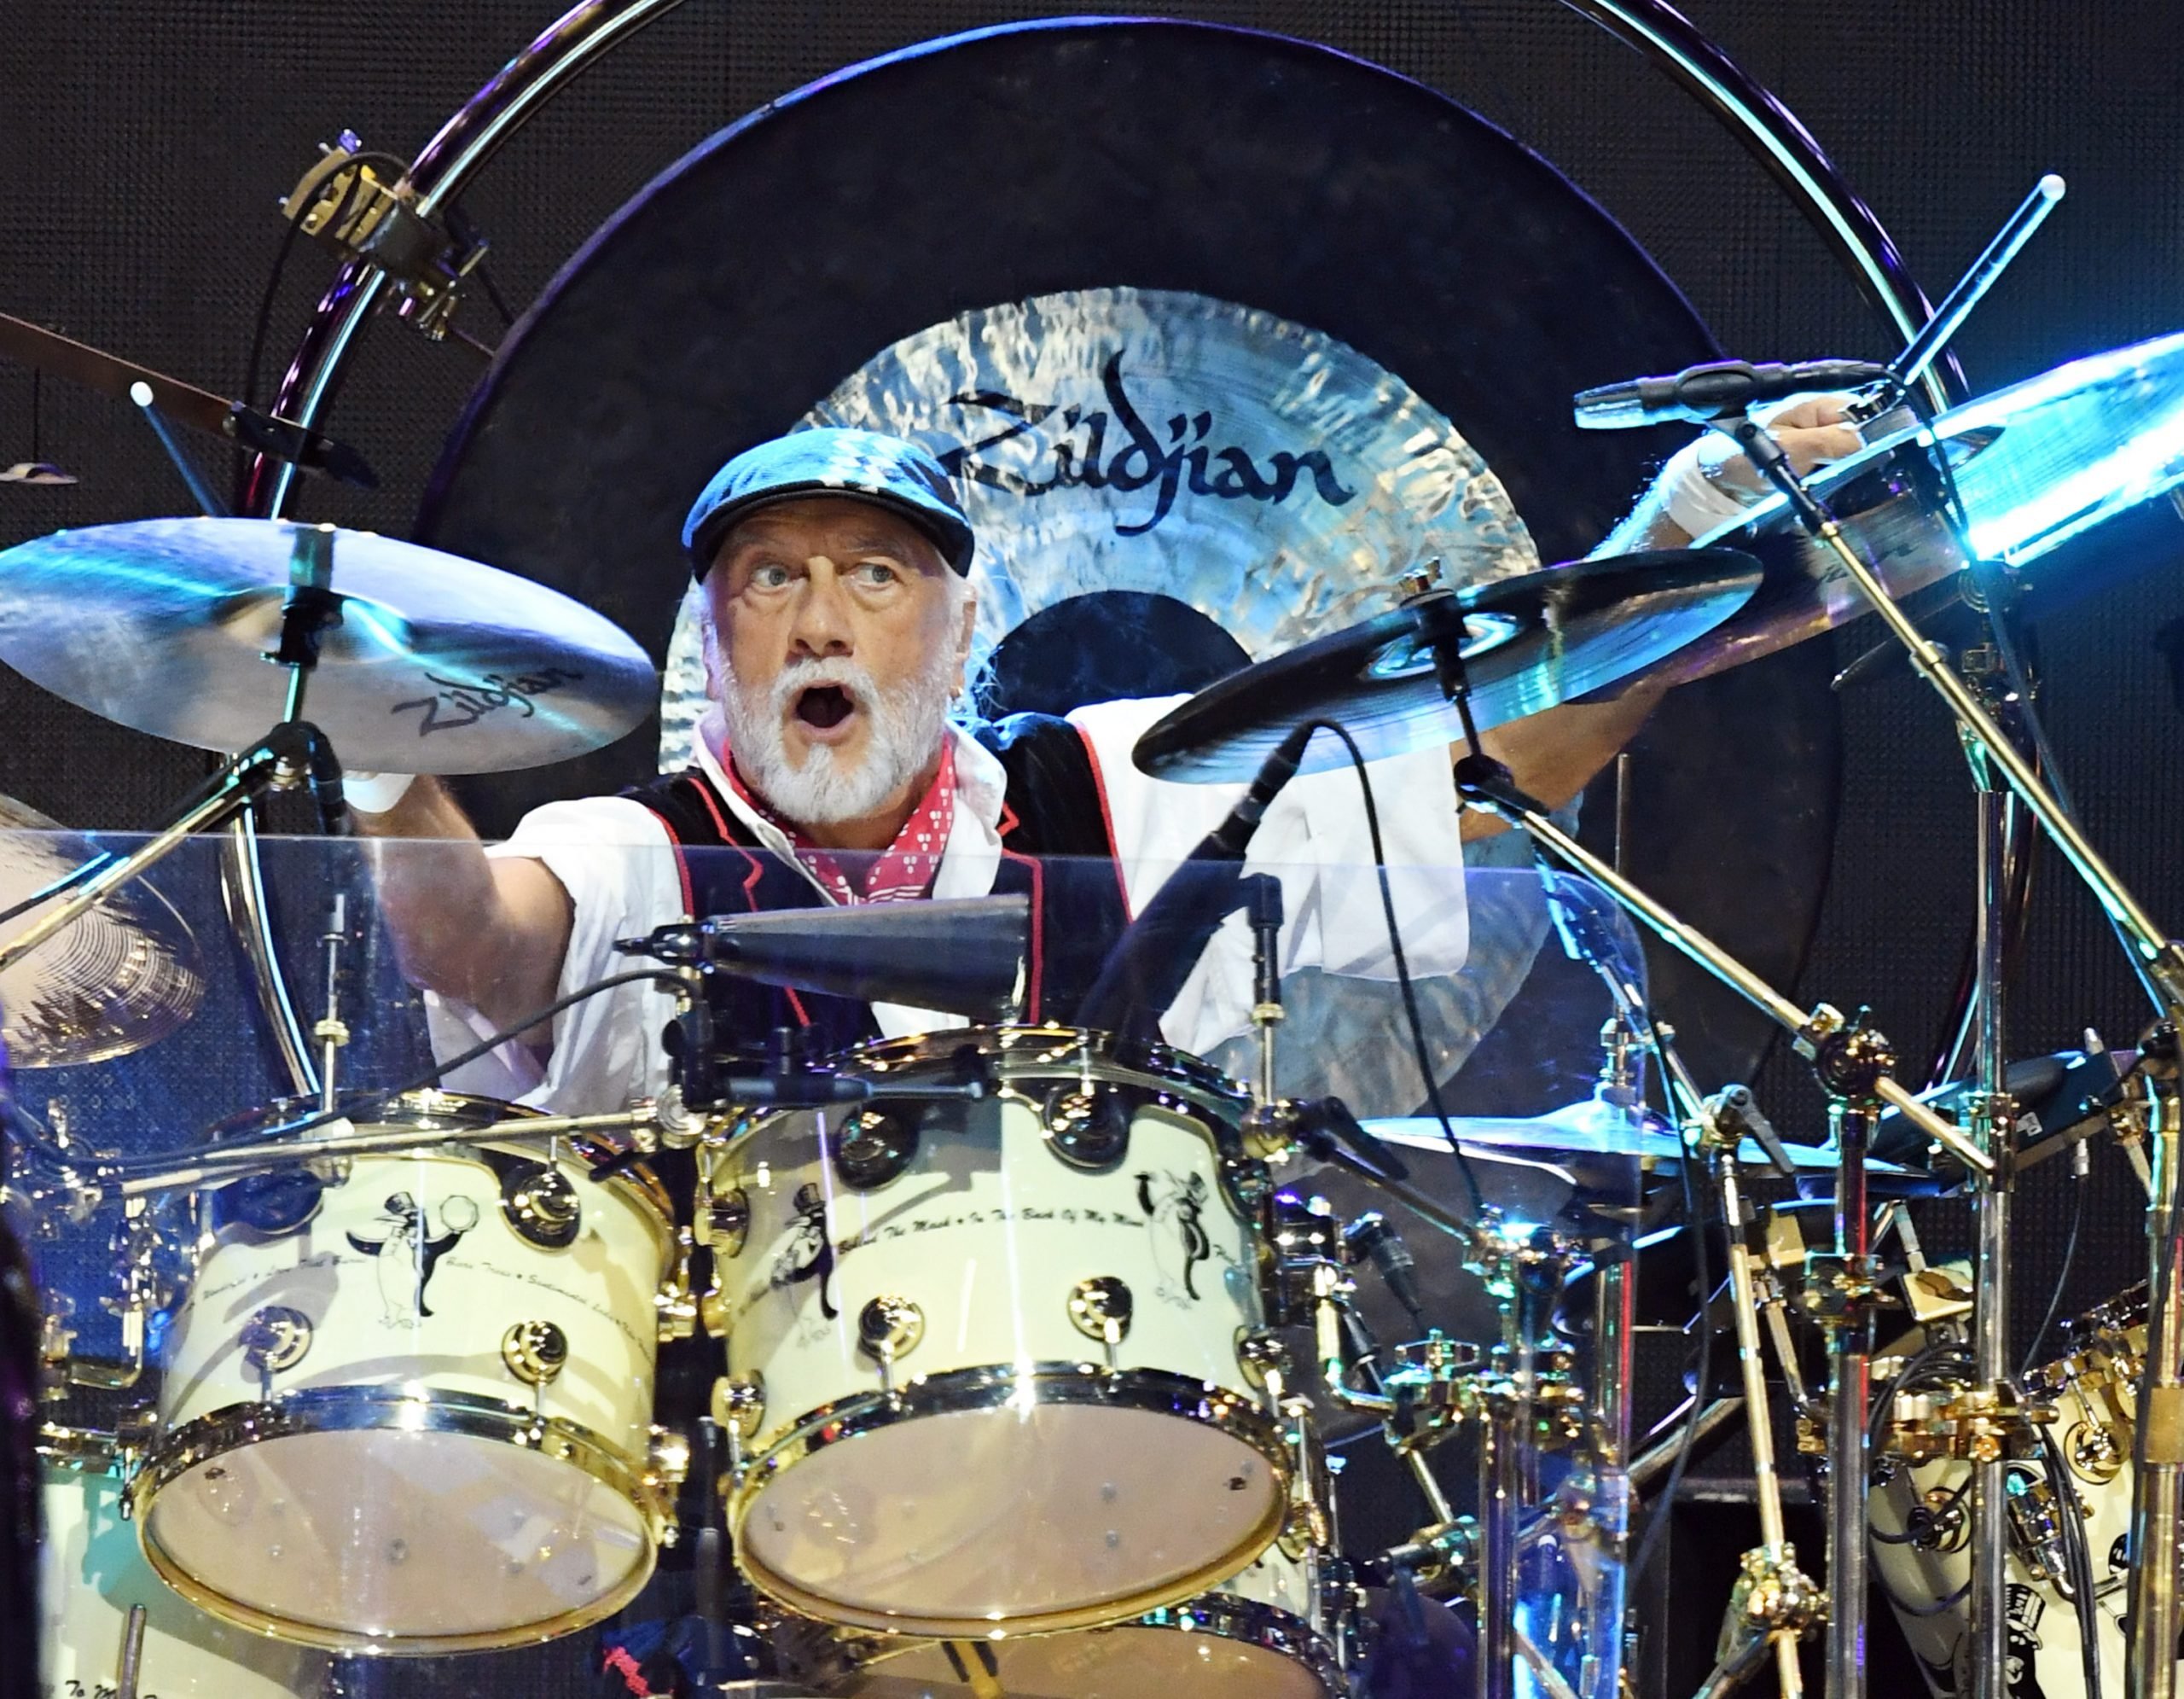 Fleetwood Mac Which Band Member Has the Highest Net Worth?